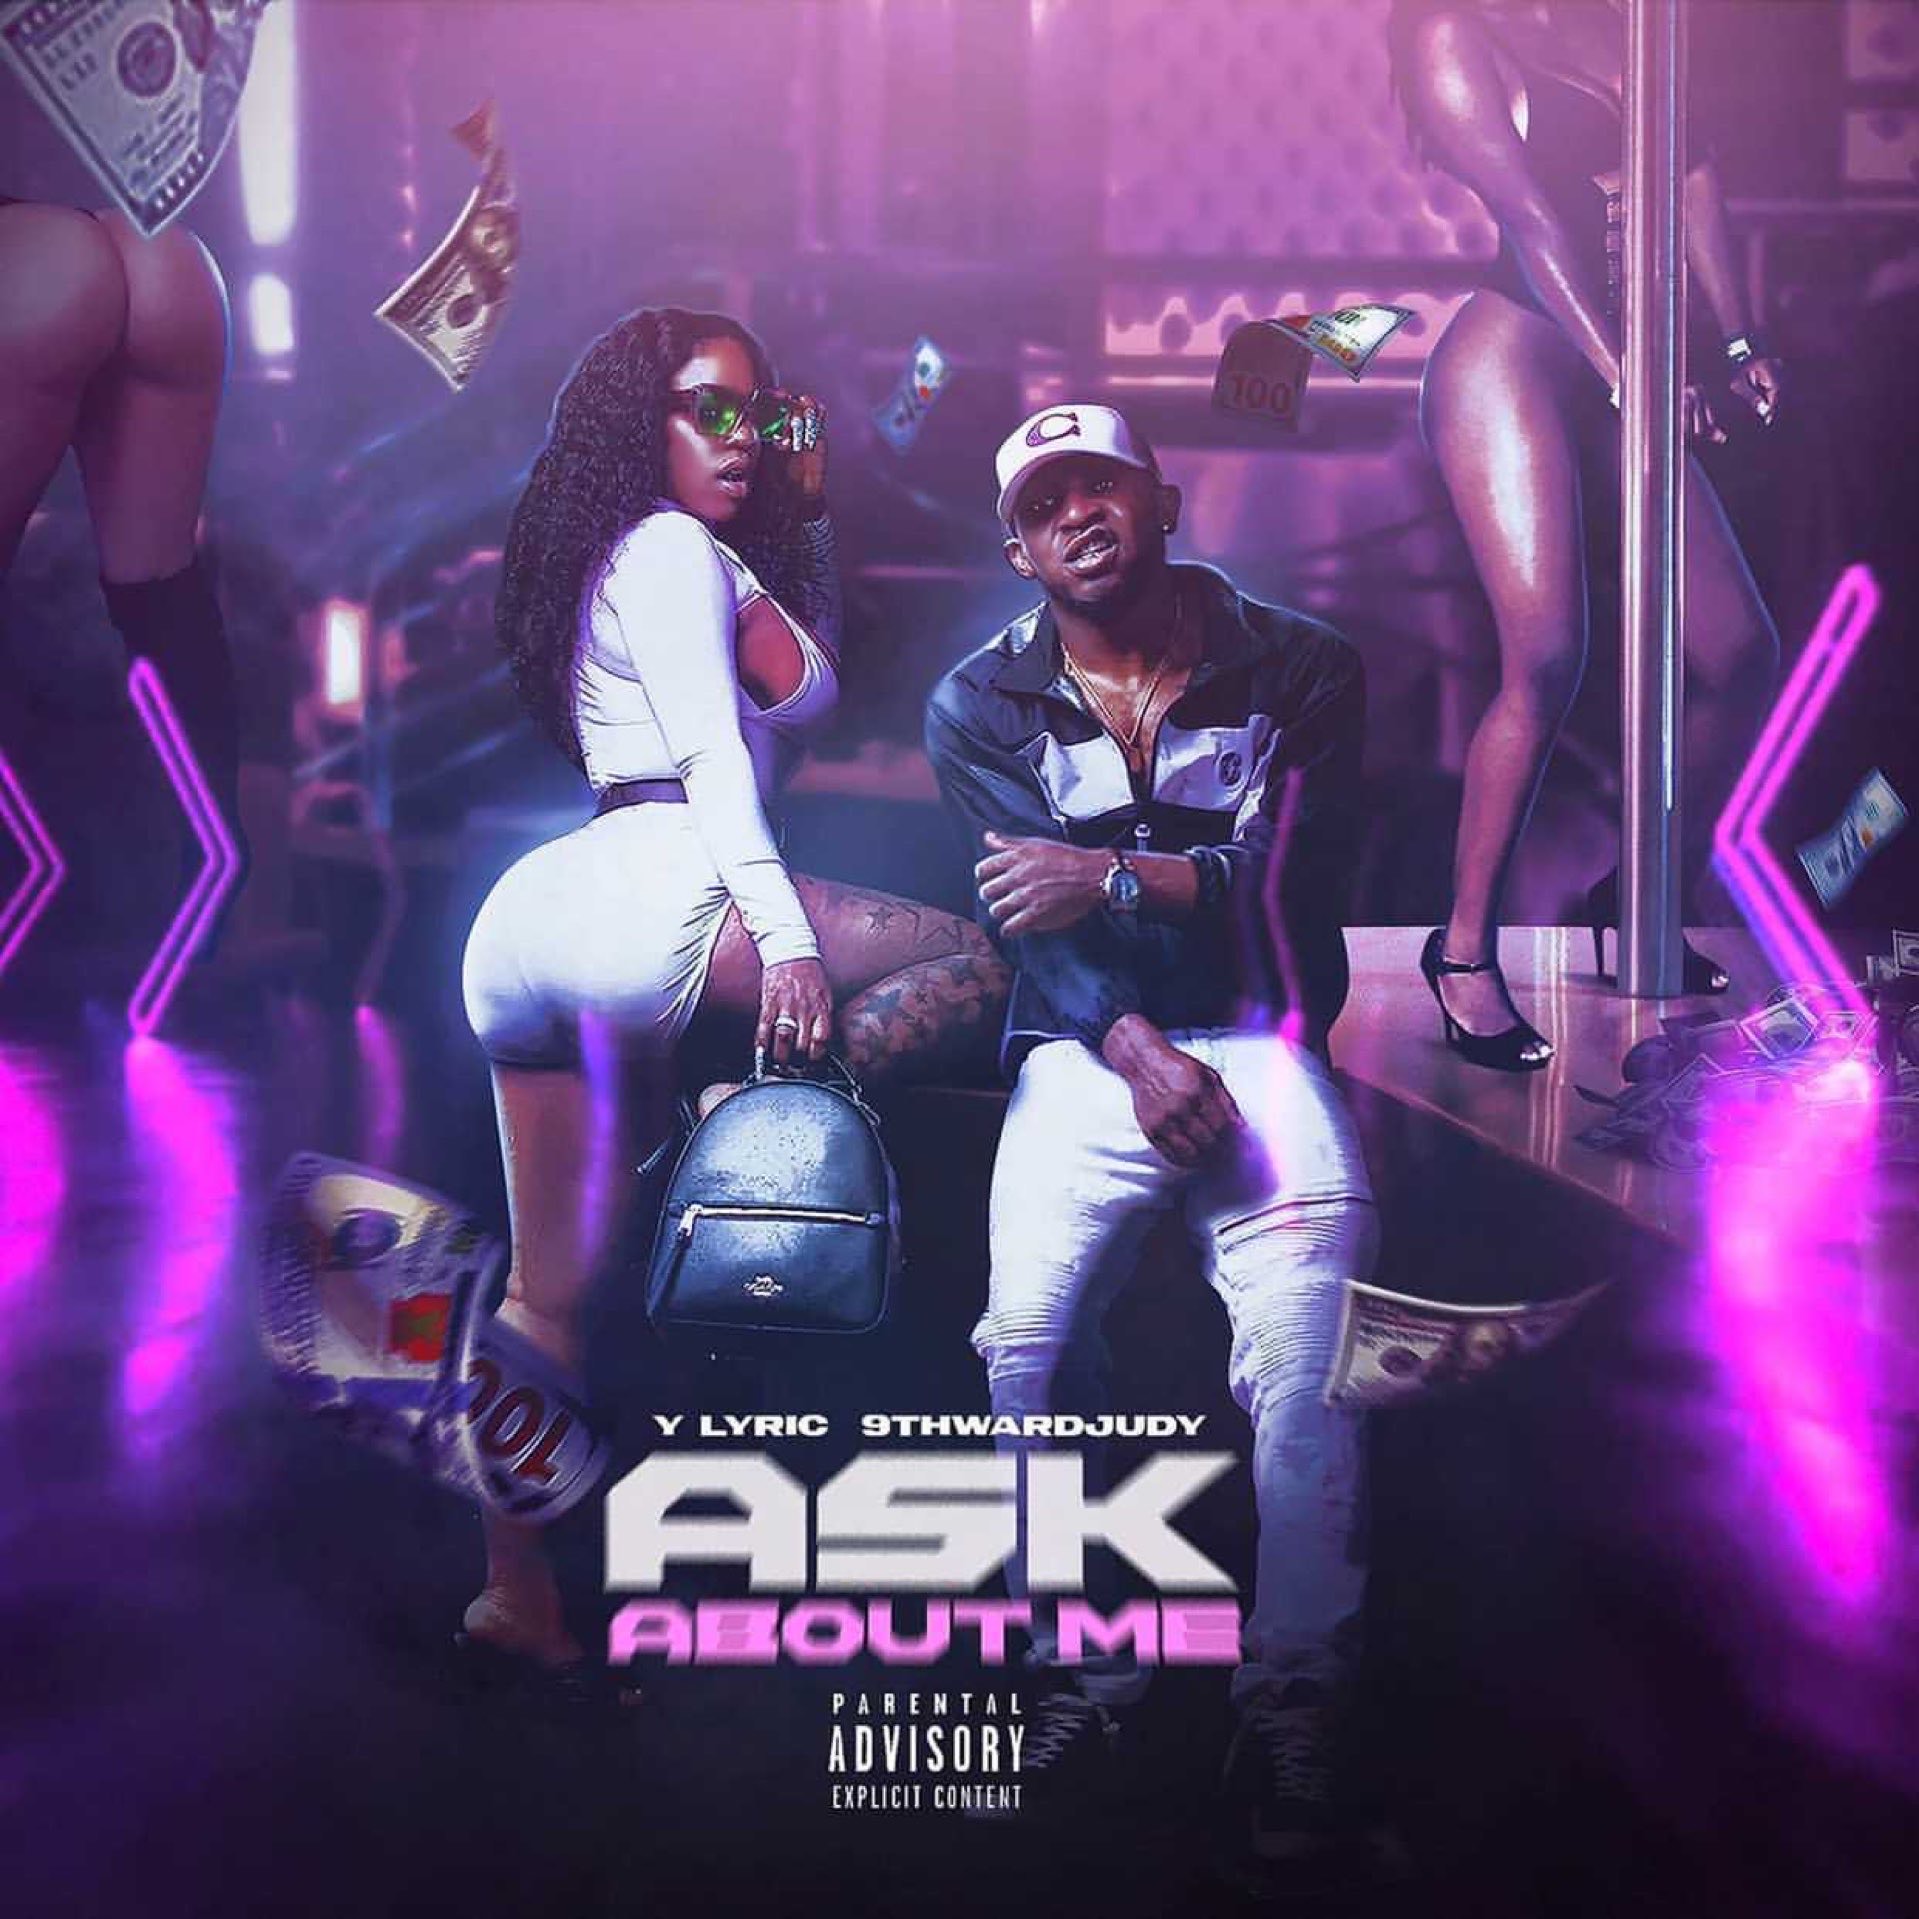 [New Video] YLyric – Ask About Me – Feat. 9th Ward Judy